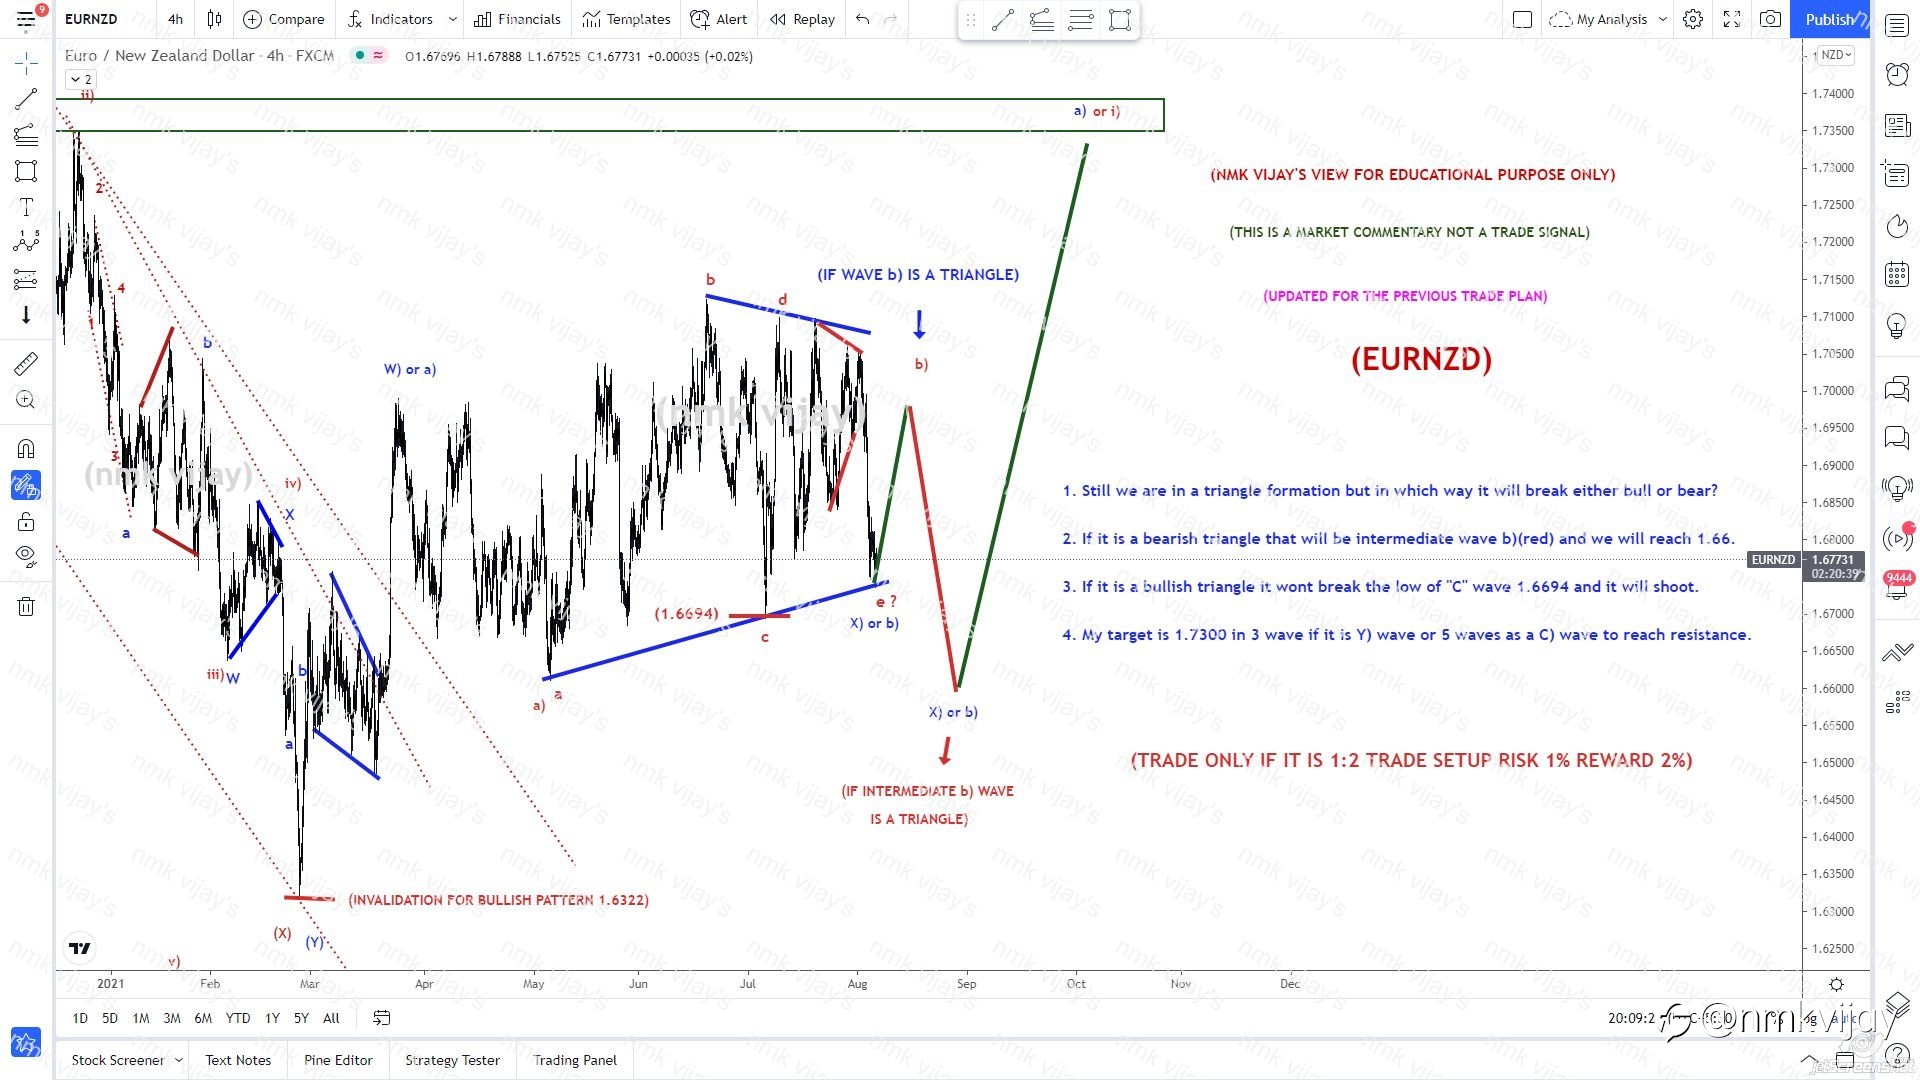 EURNZD-Still we are in bigger triangle either bull or bear !!!